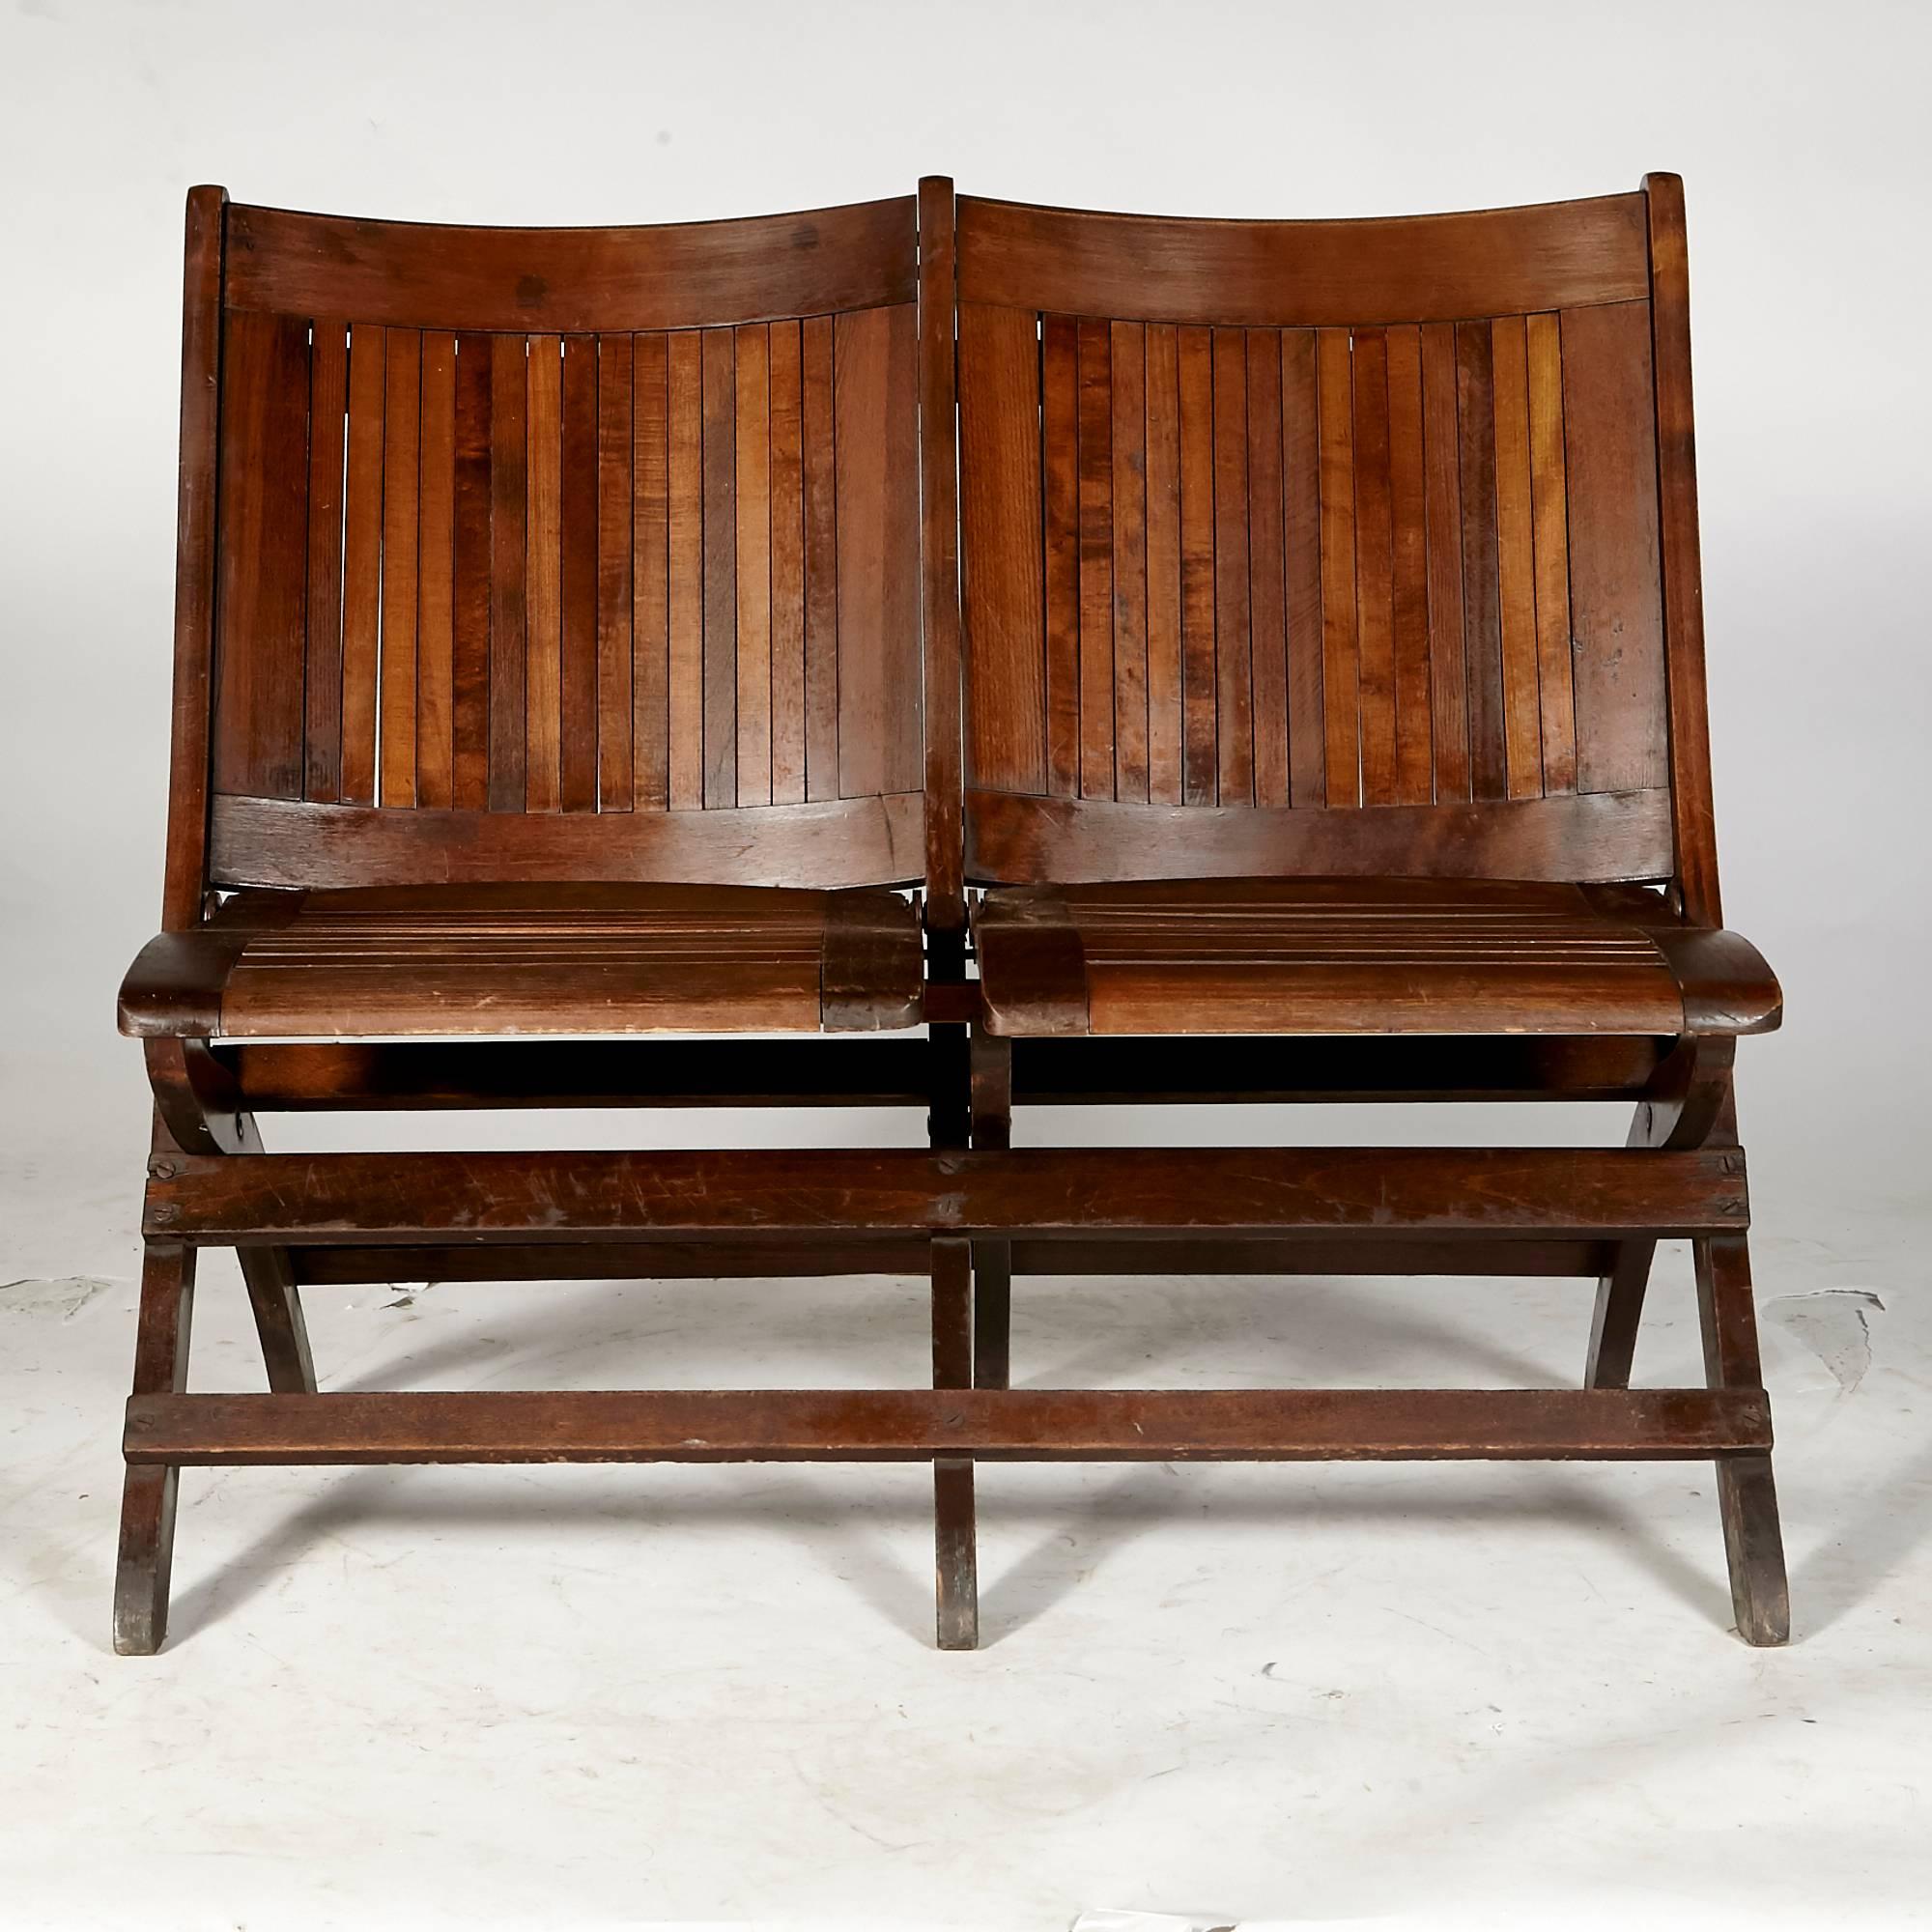 Heywood-Wakefield style folding wood stadium seat for two, circa 1930s. The seat is in refinished condition. Unmarked.